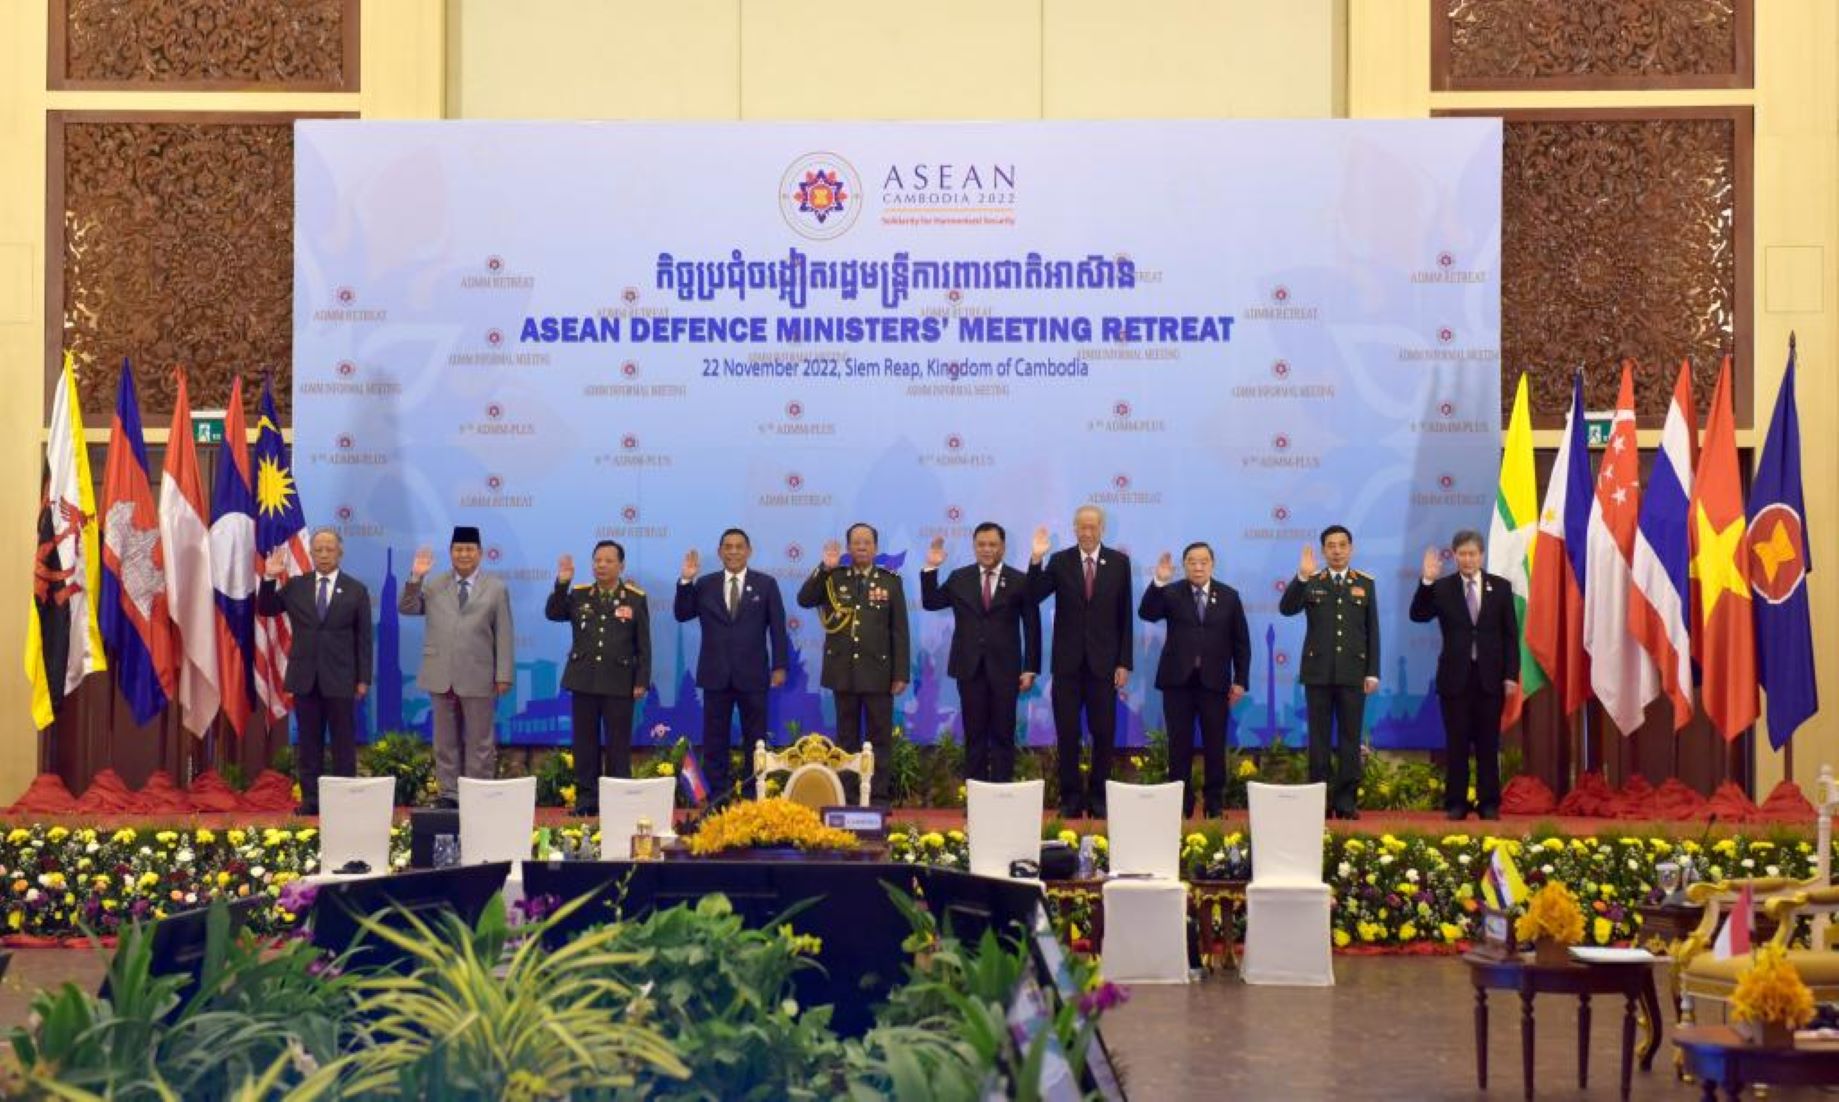 Cambodia’s Defence Minister Called For Collective Efforts, Solidarity To Address Security Challenges To ASEAN